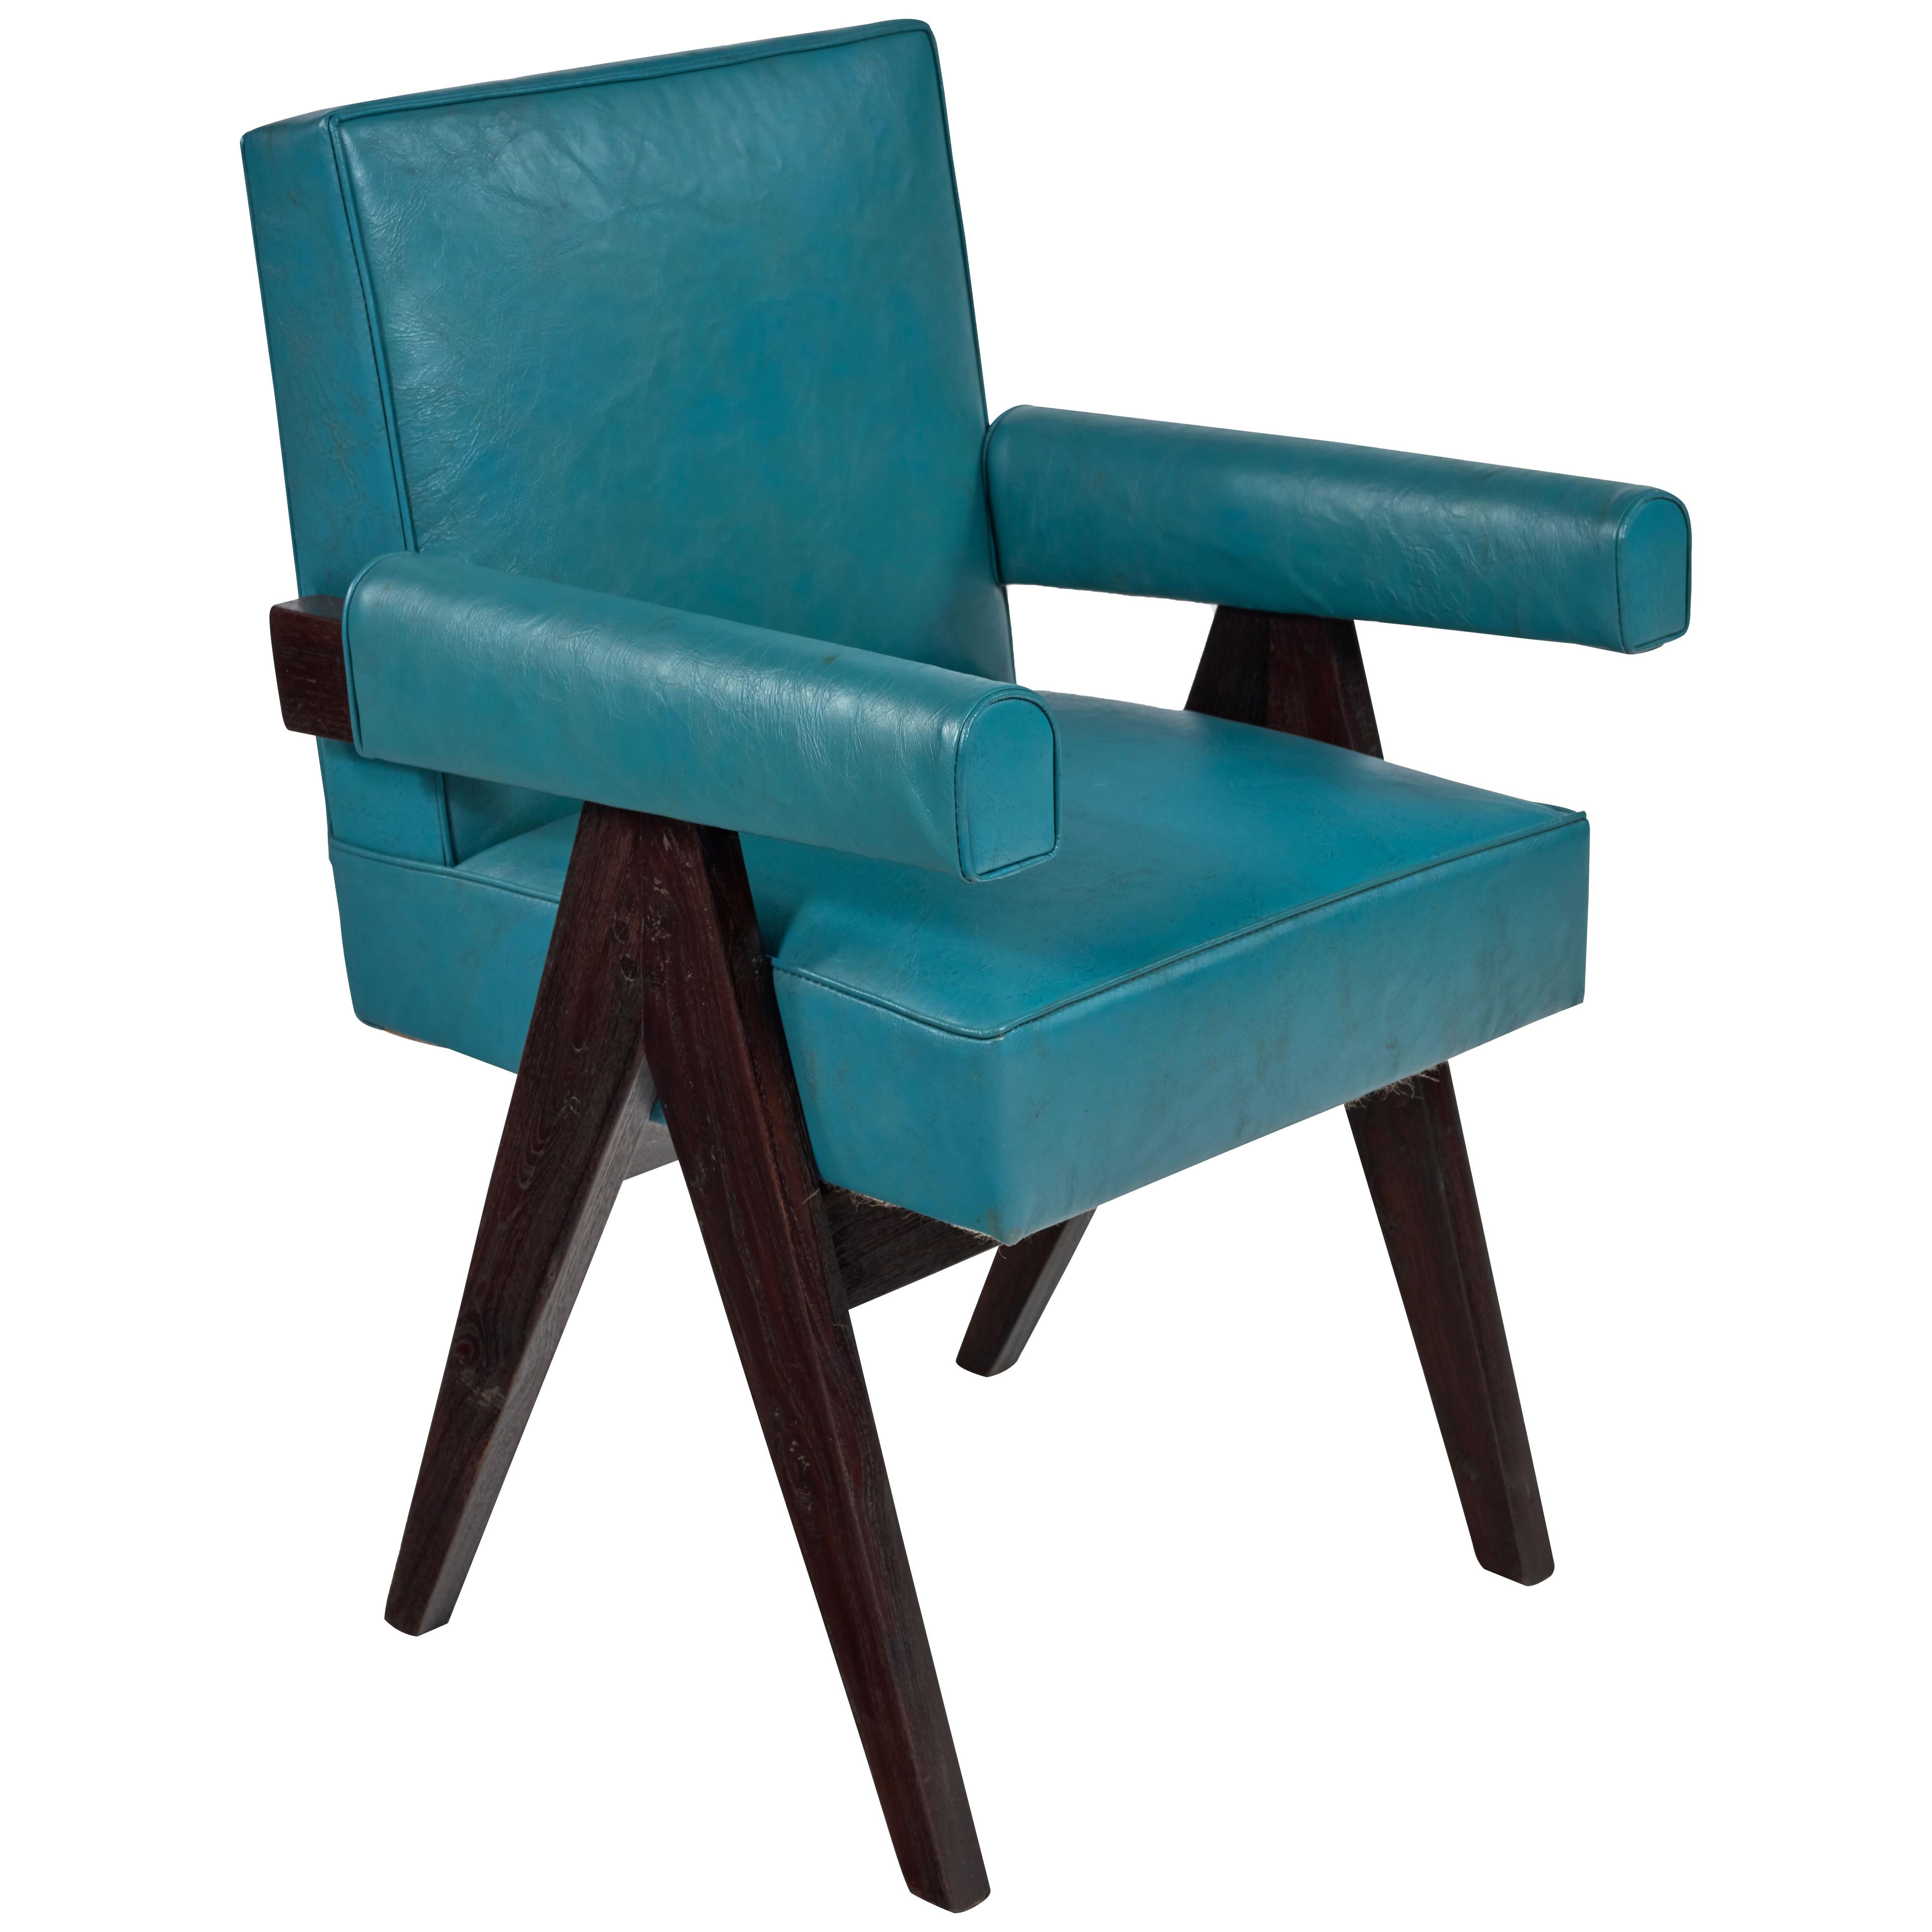 Committee Armchair by Pierre Jeanneret circa 1953-54